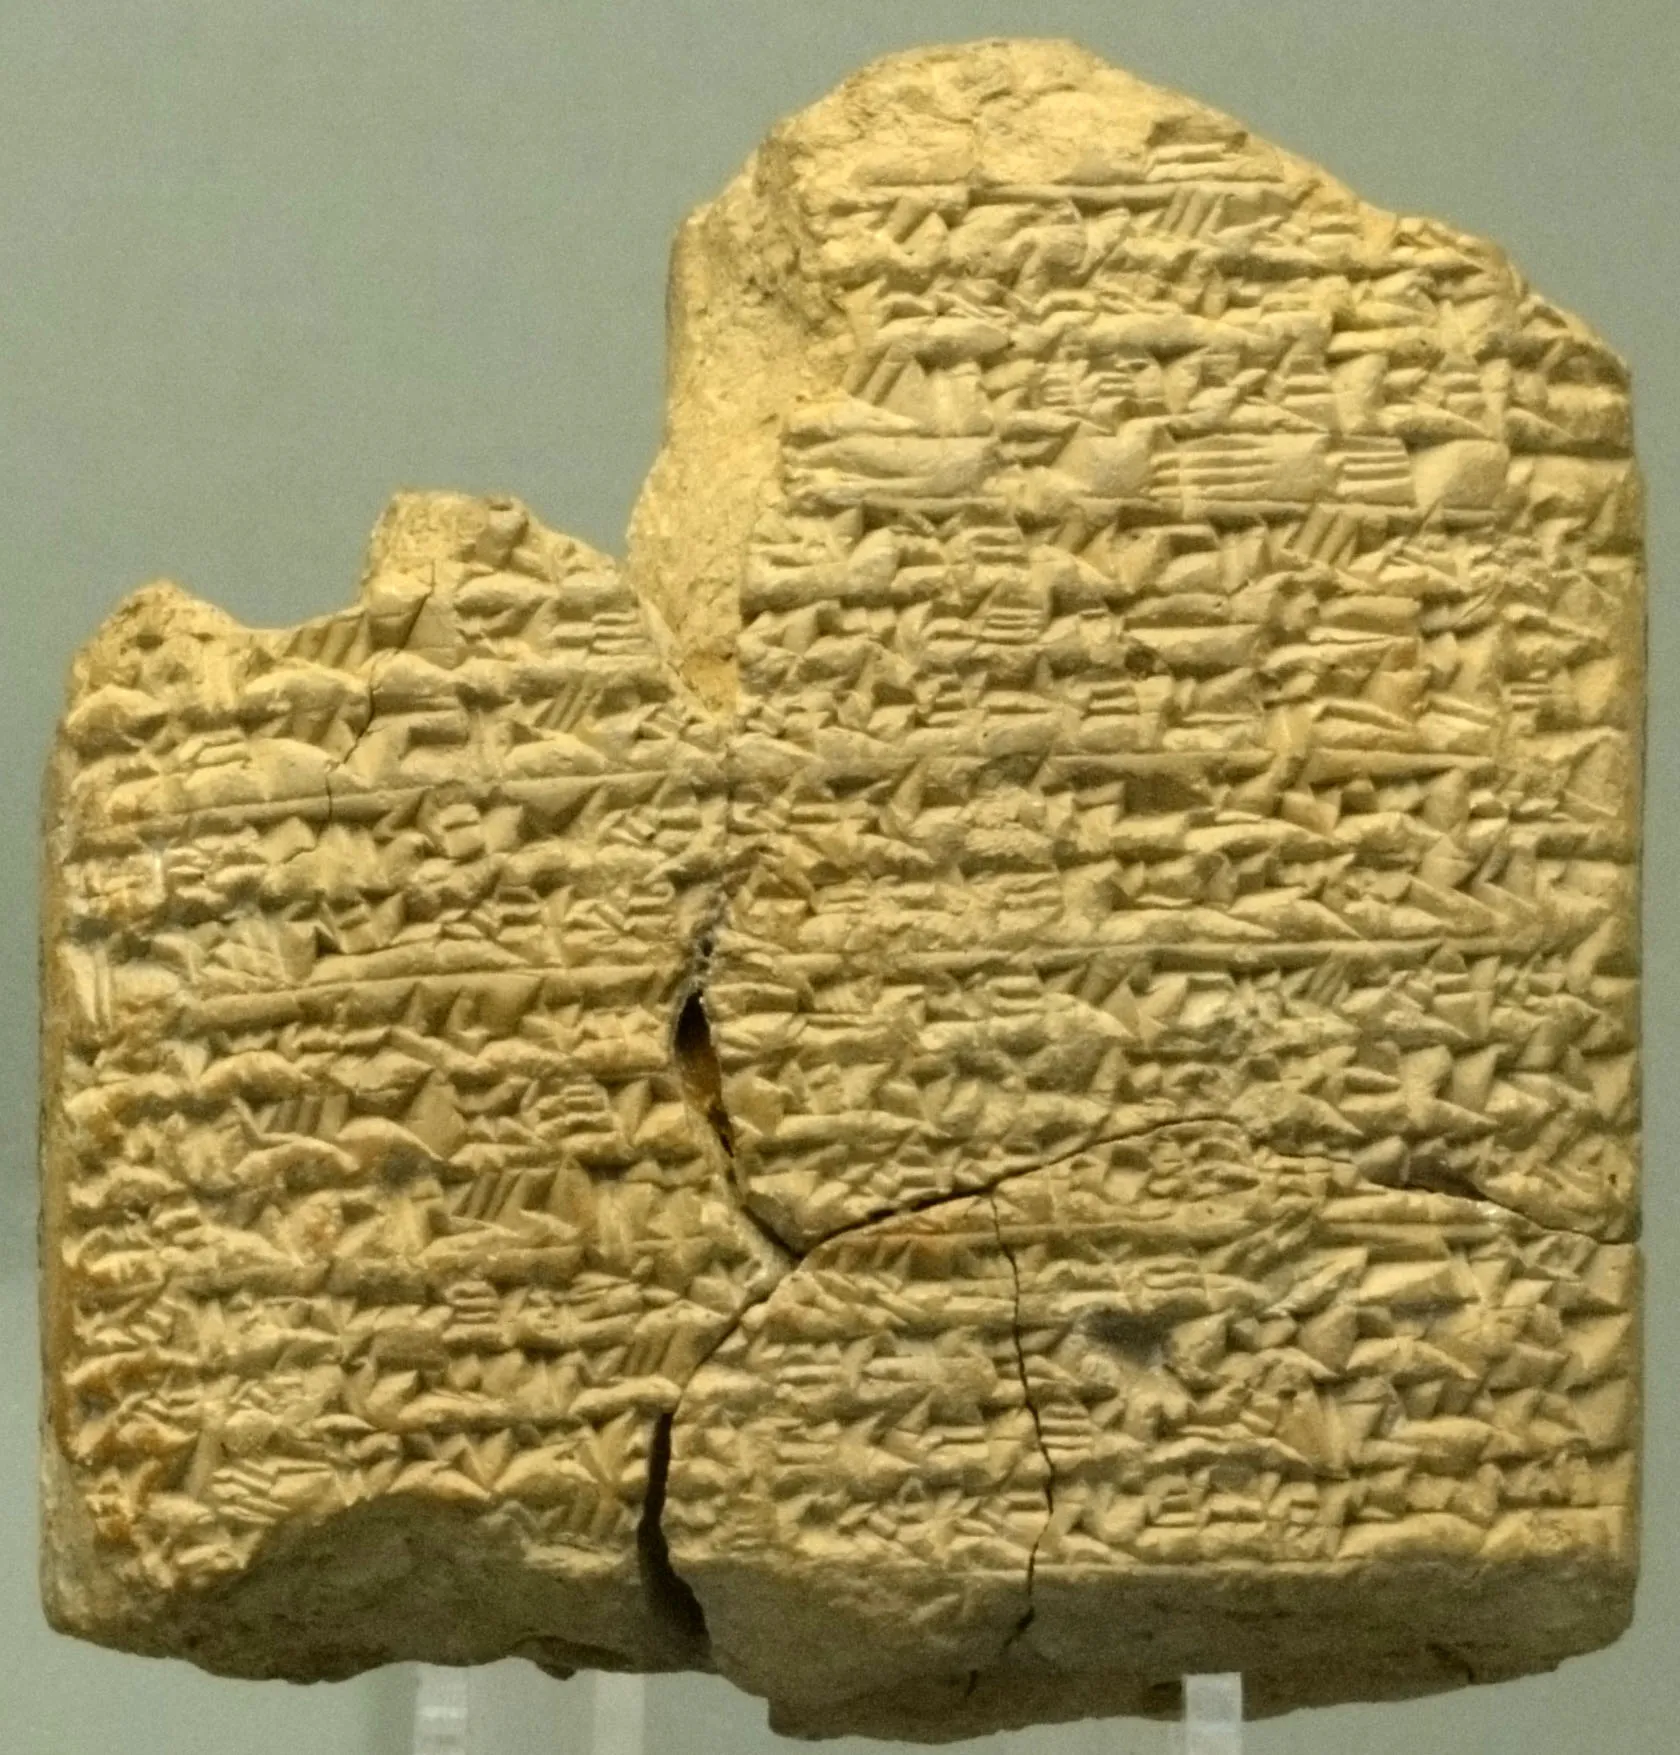 Photo showing: 600-500BC cuneiform tablet with instructions for dyeing wool. Found in Sippar, Neo-babylonian period.